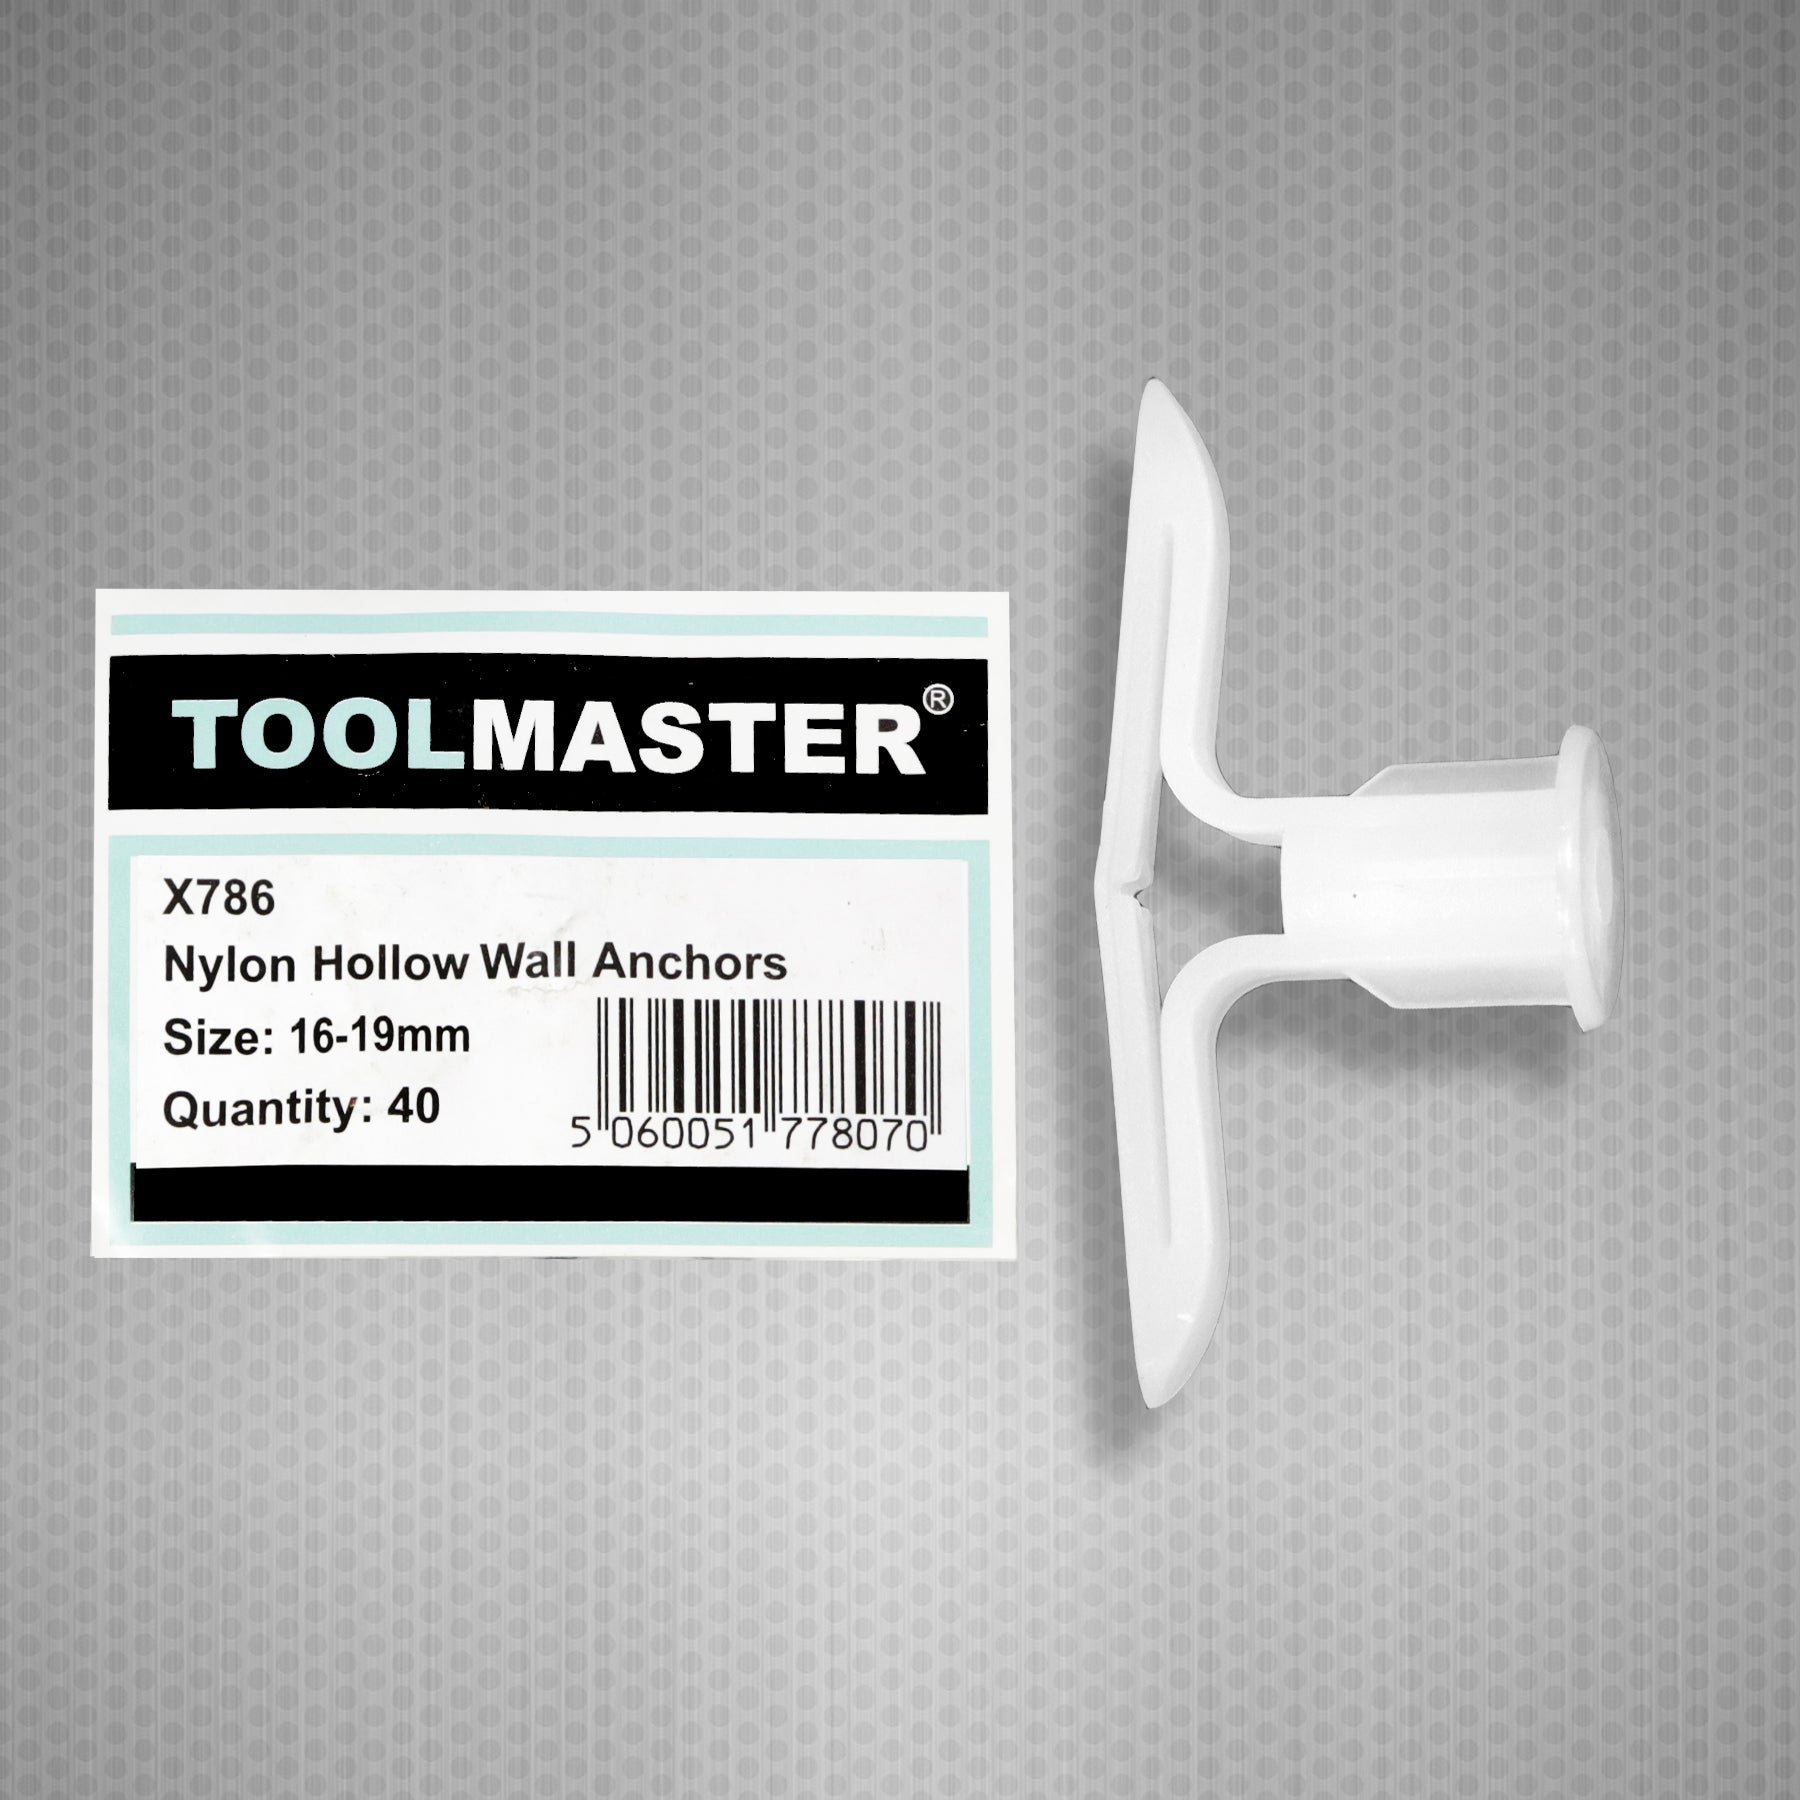 Toolmaster Nylon Hollow Wall Anchors - Size 16-19mm